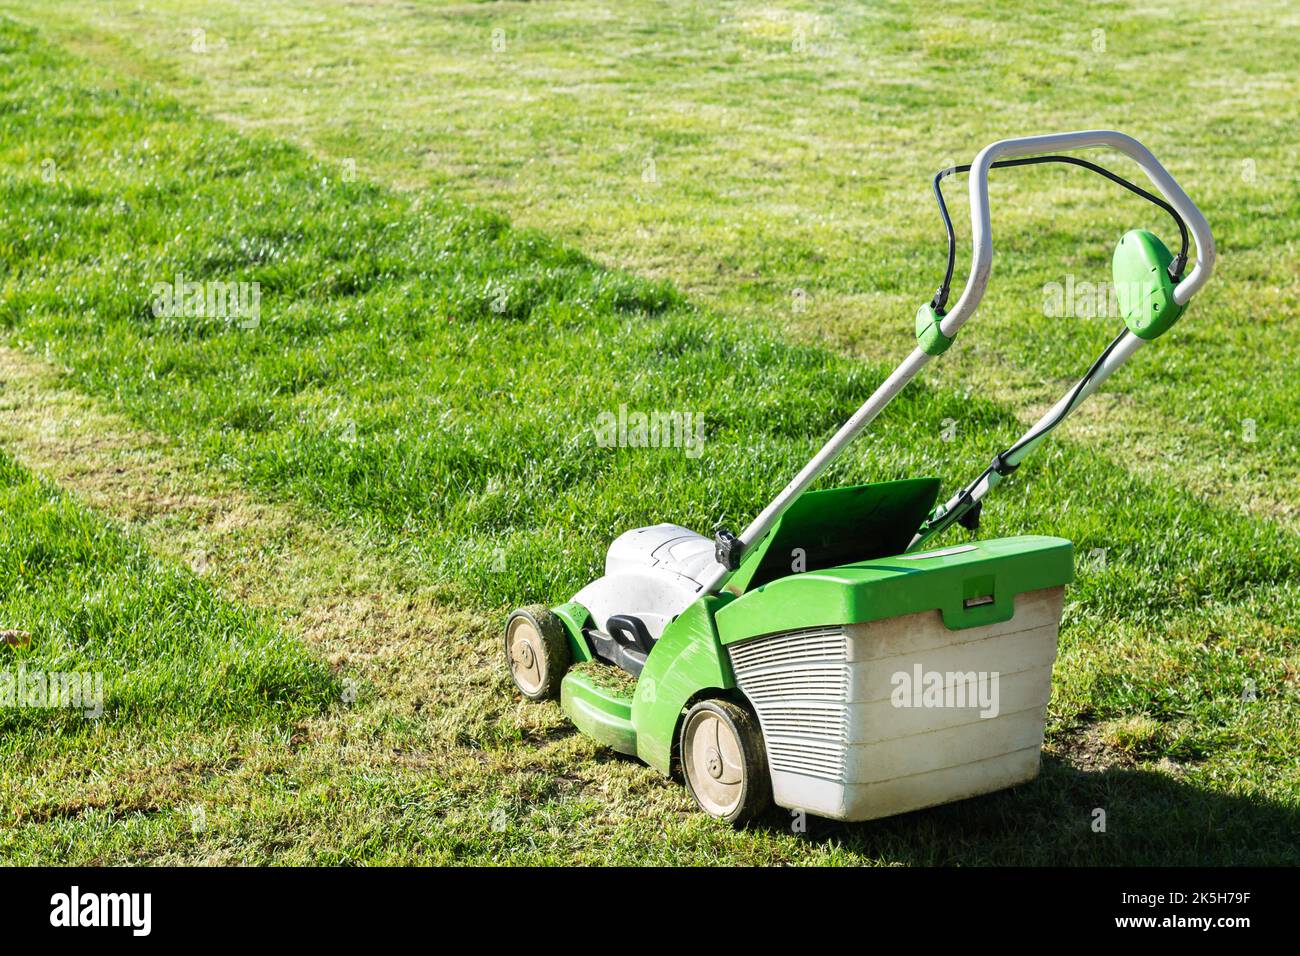 Lawn mover on green grass in summer garden. Machine for cutting grass Stock Photo